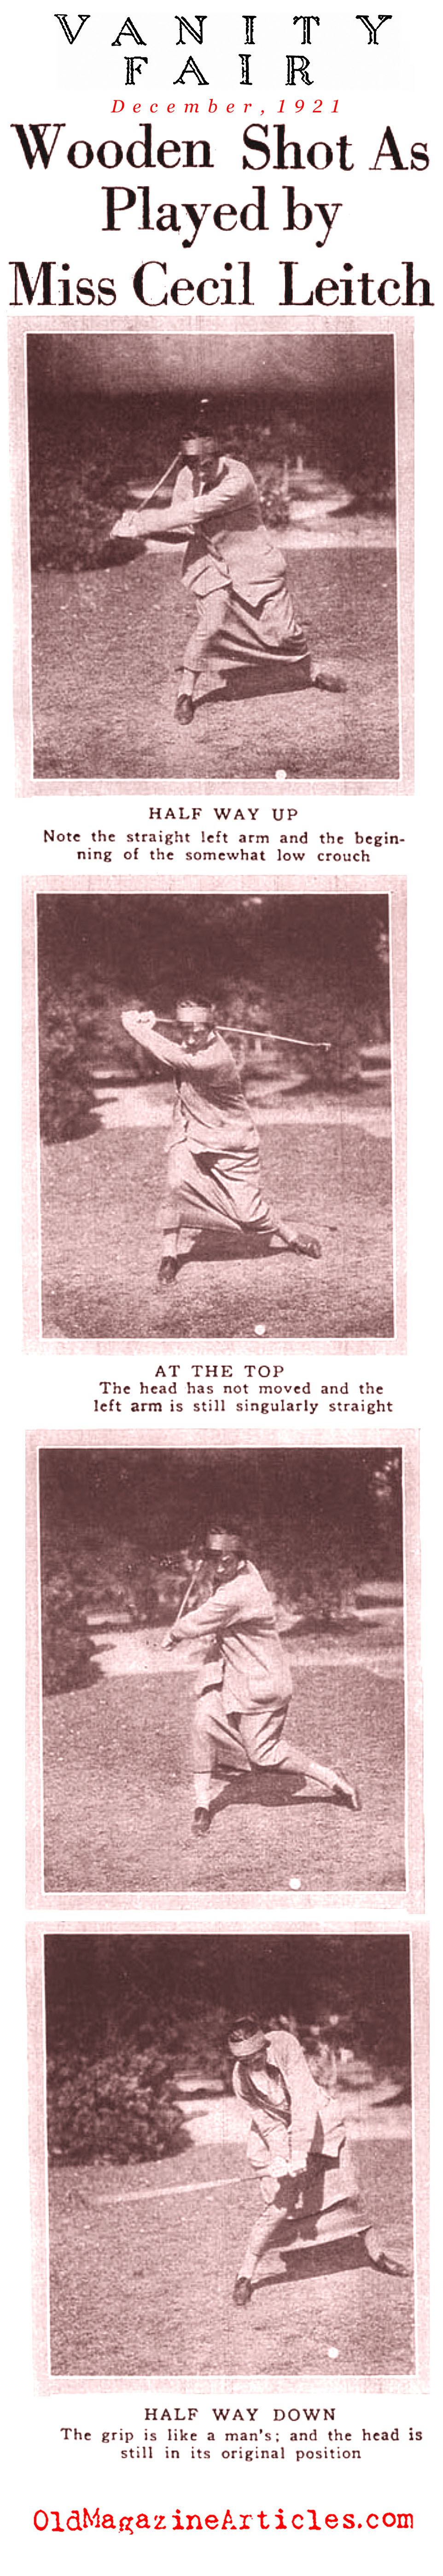 The Swing of Cecil Leitch (Vanity Fair Magazine, 1921)